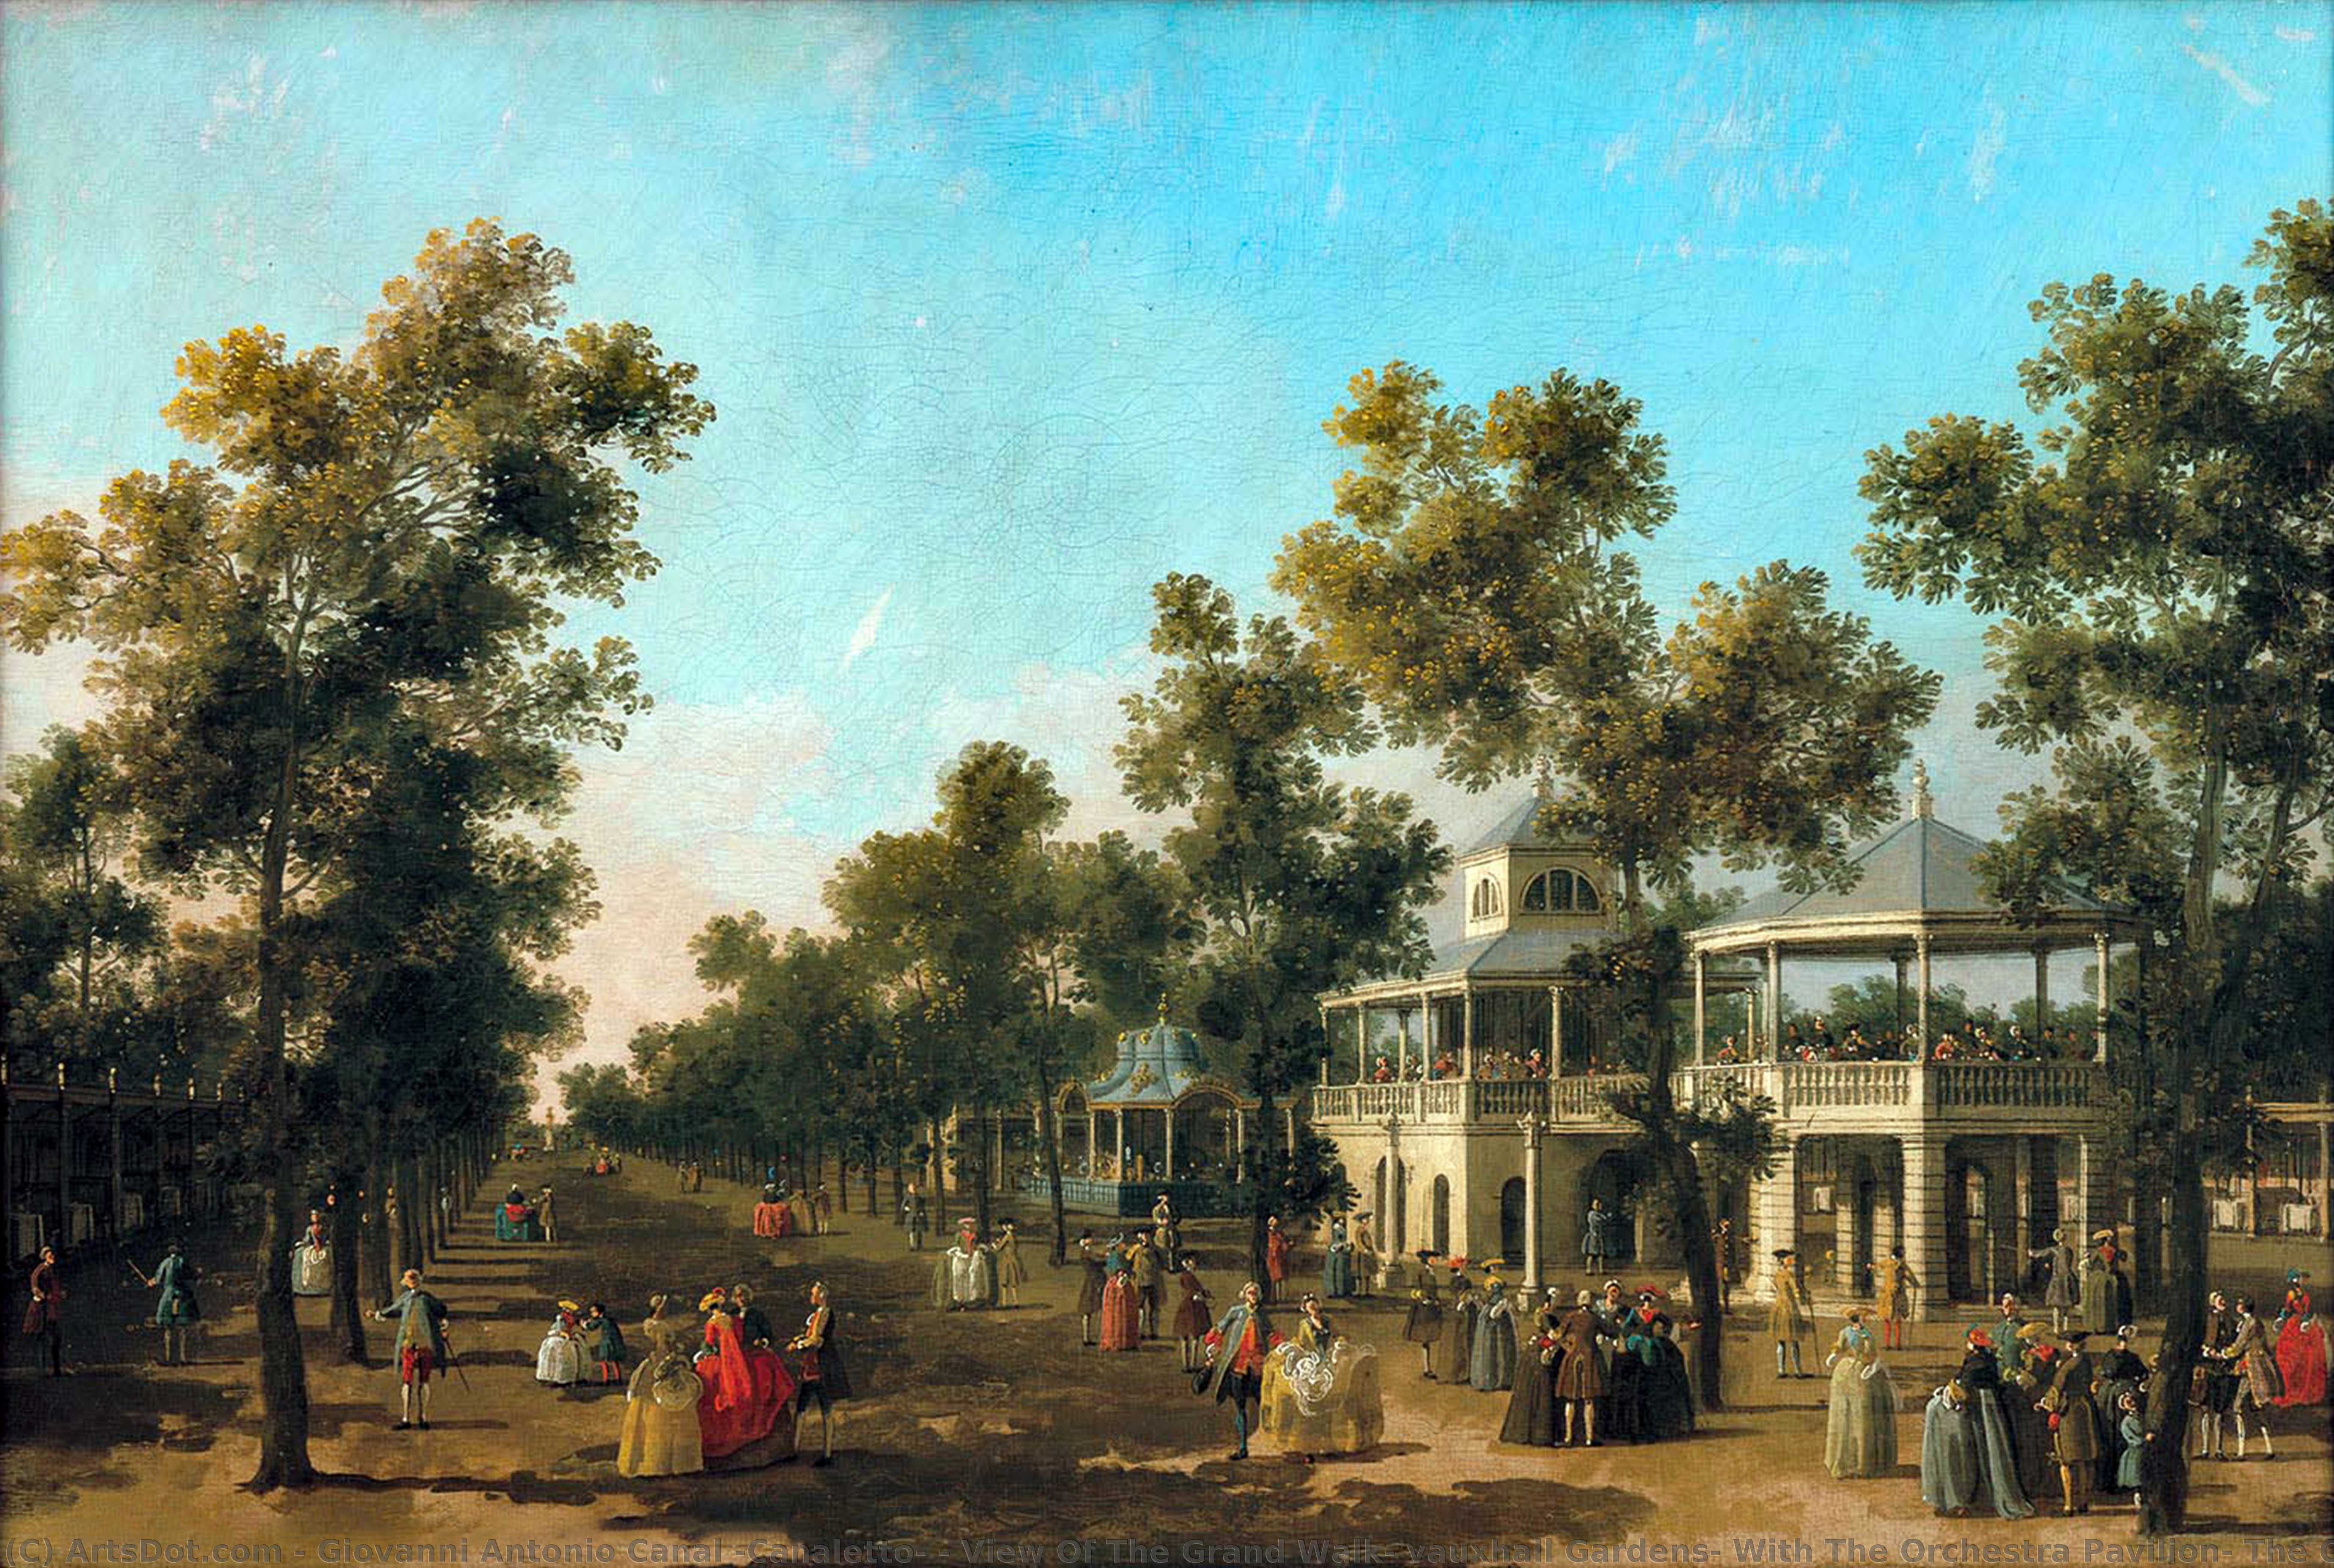 WikiOO.org - Encyclopedia of Fine Arts - Festés, Grafika Giovanni Antonio Canal (Canaletto) - View Of The Grand Walk, vauxhall Gardens, With The Orchestra Pavilion, The Organ House, The Turkish Dining Tent And The Statue Of Aurora